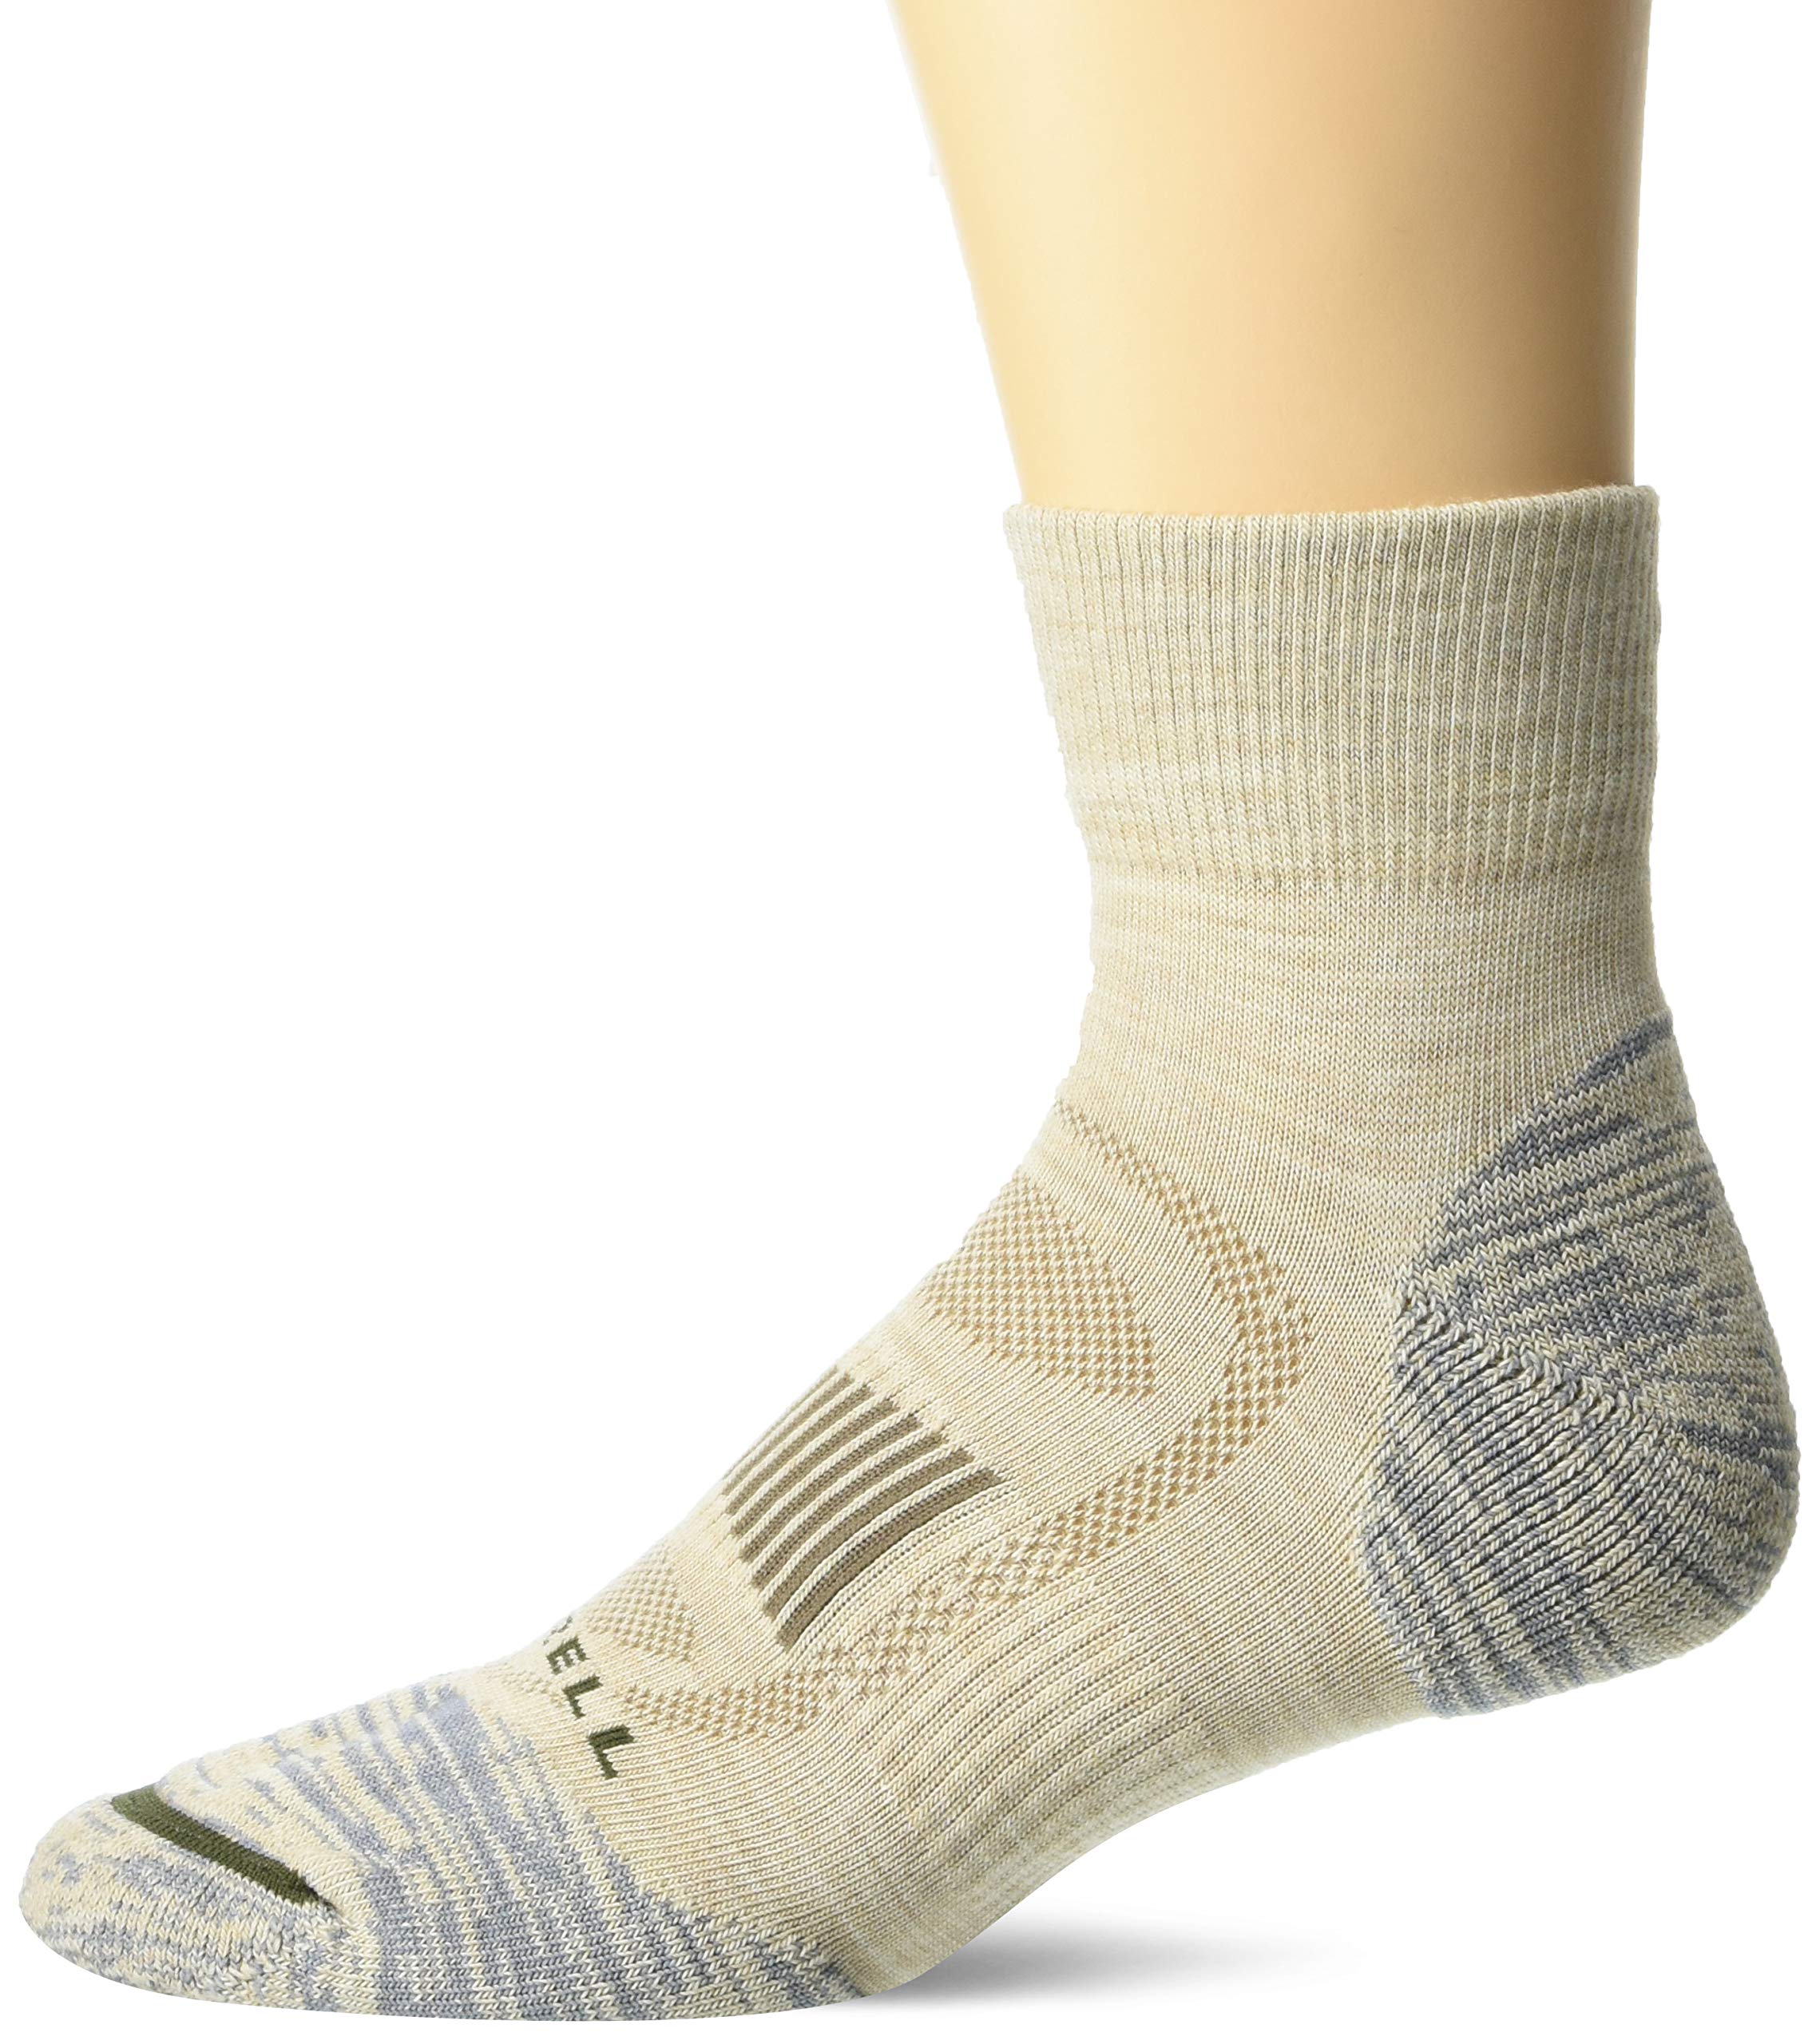 Merrell Unisex-adults Men's and Women's Zoned Cushioned Wool Hiking Socks - Unisex Arch Support Band and Breathable Mesh